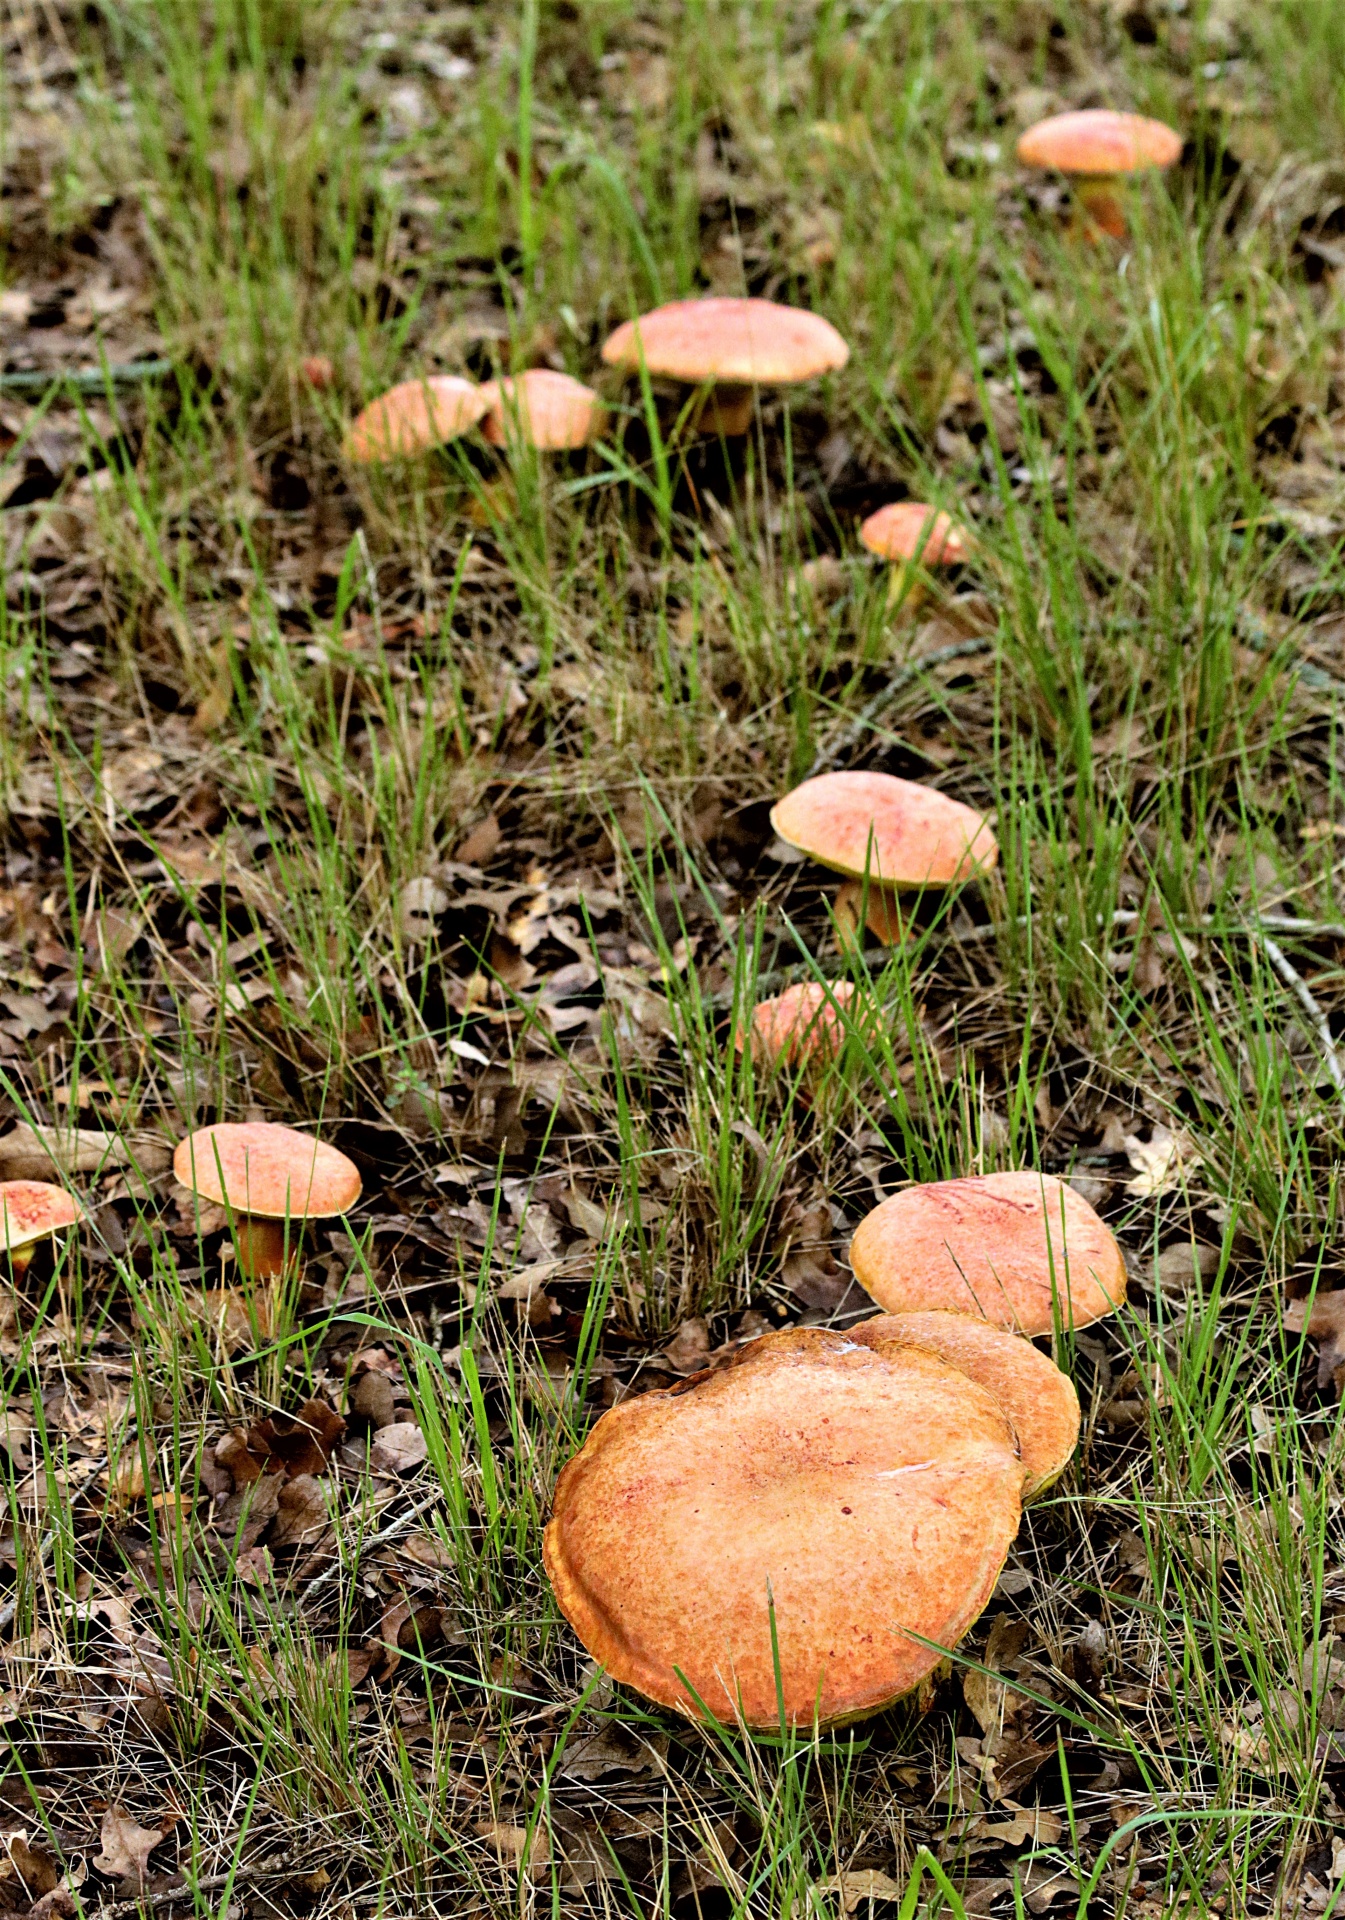 A group of bolete mushrooms growing in early spring grass.